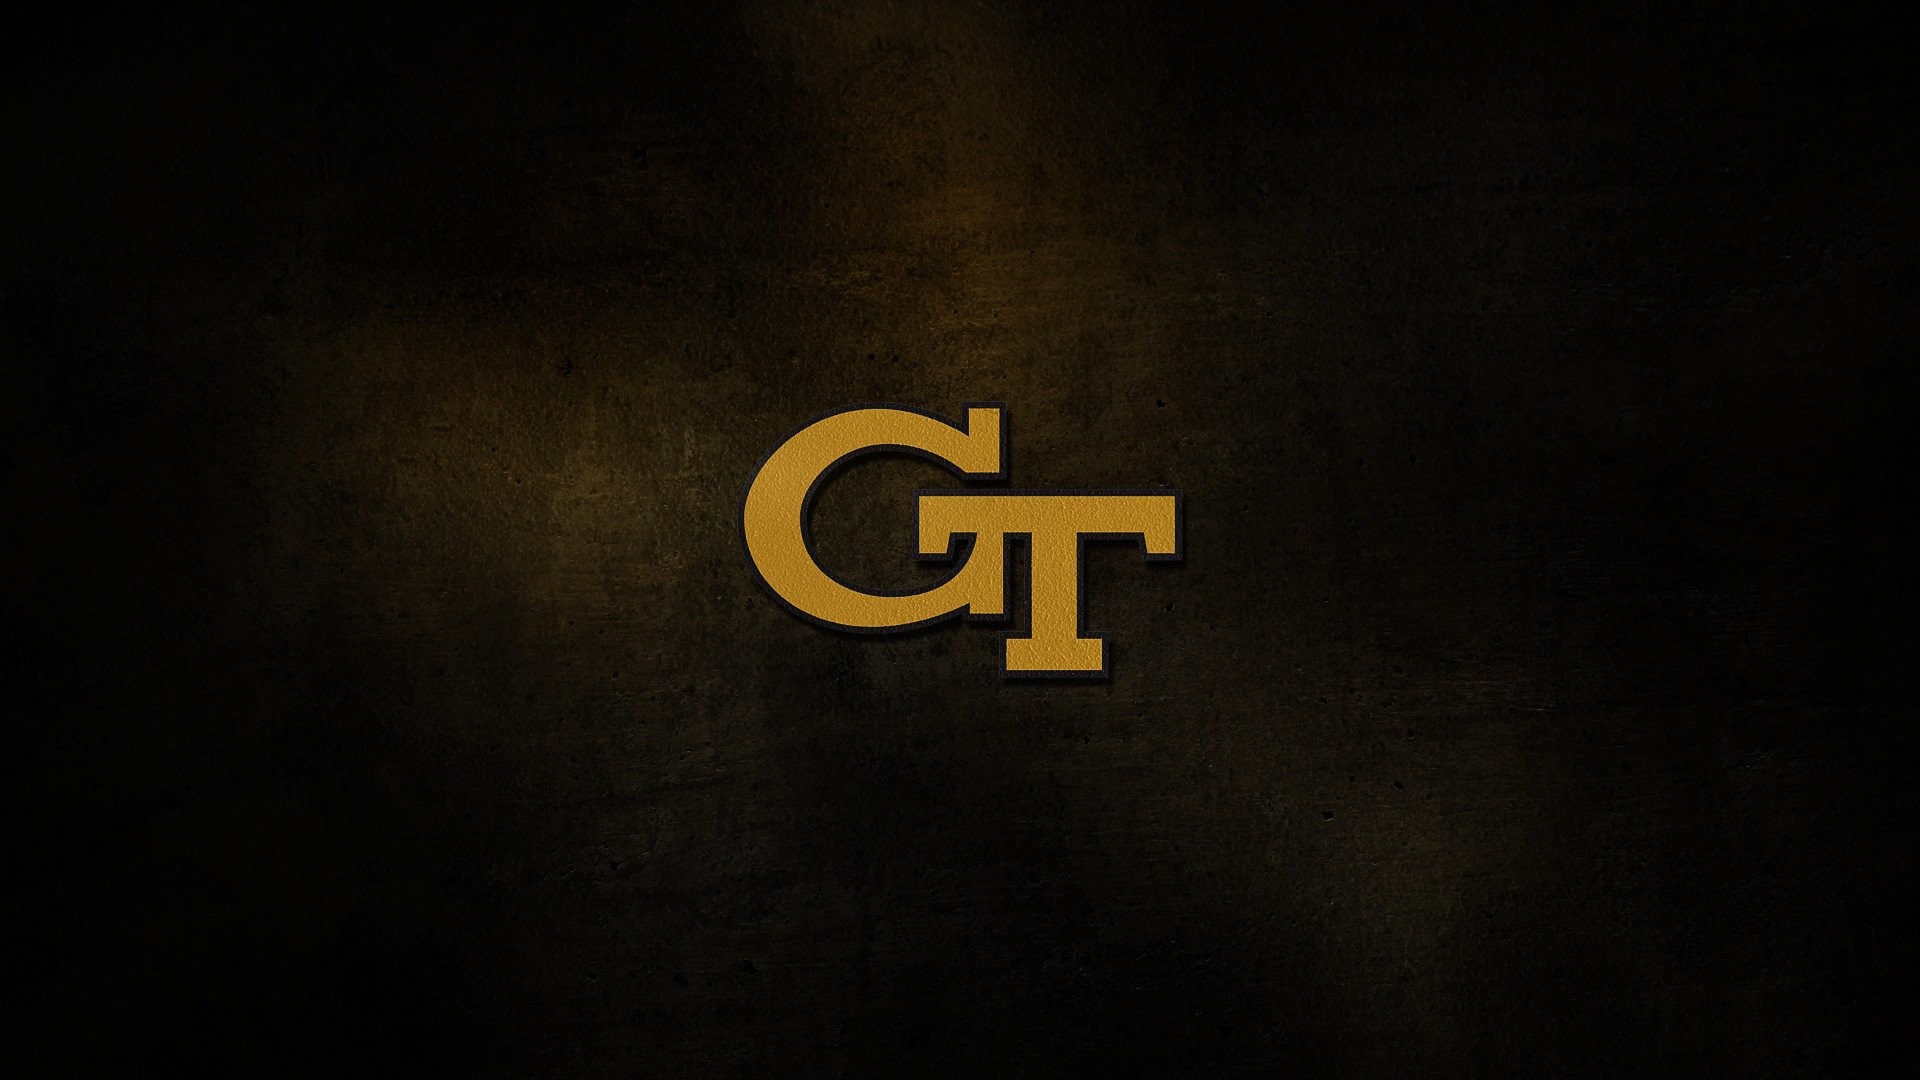 1920x1080 Georgia Tech Live Wallpaper HD - Android Apps on Google Play